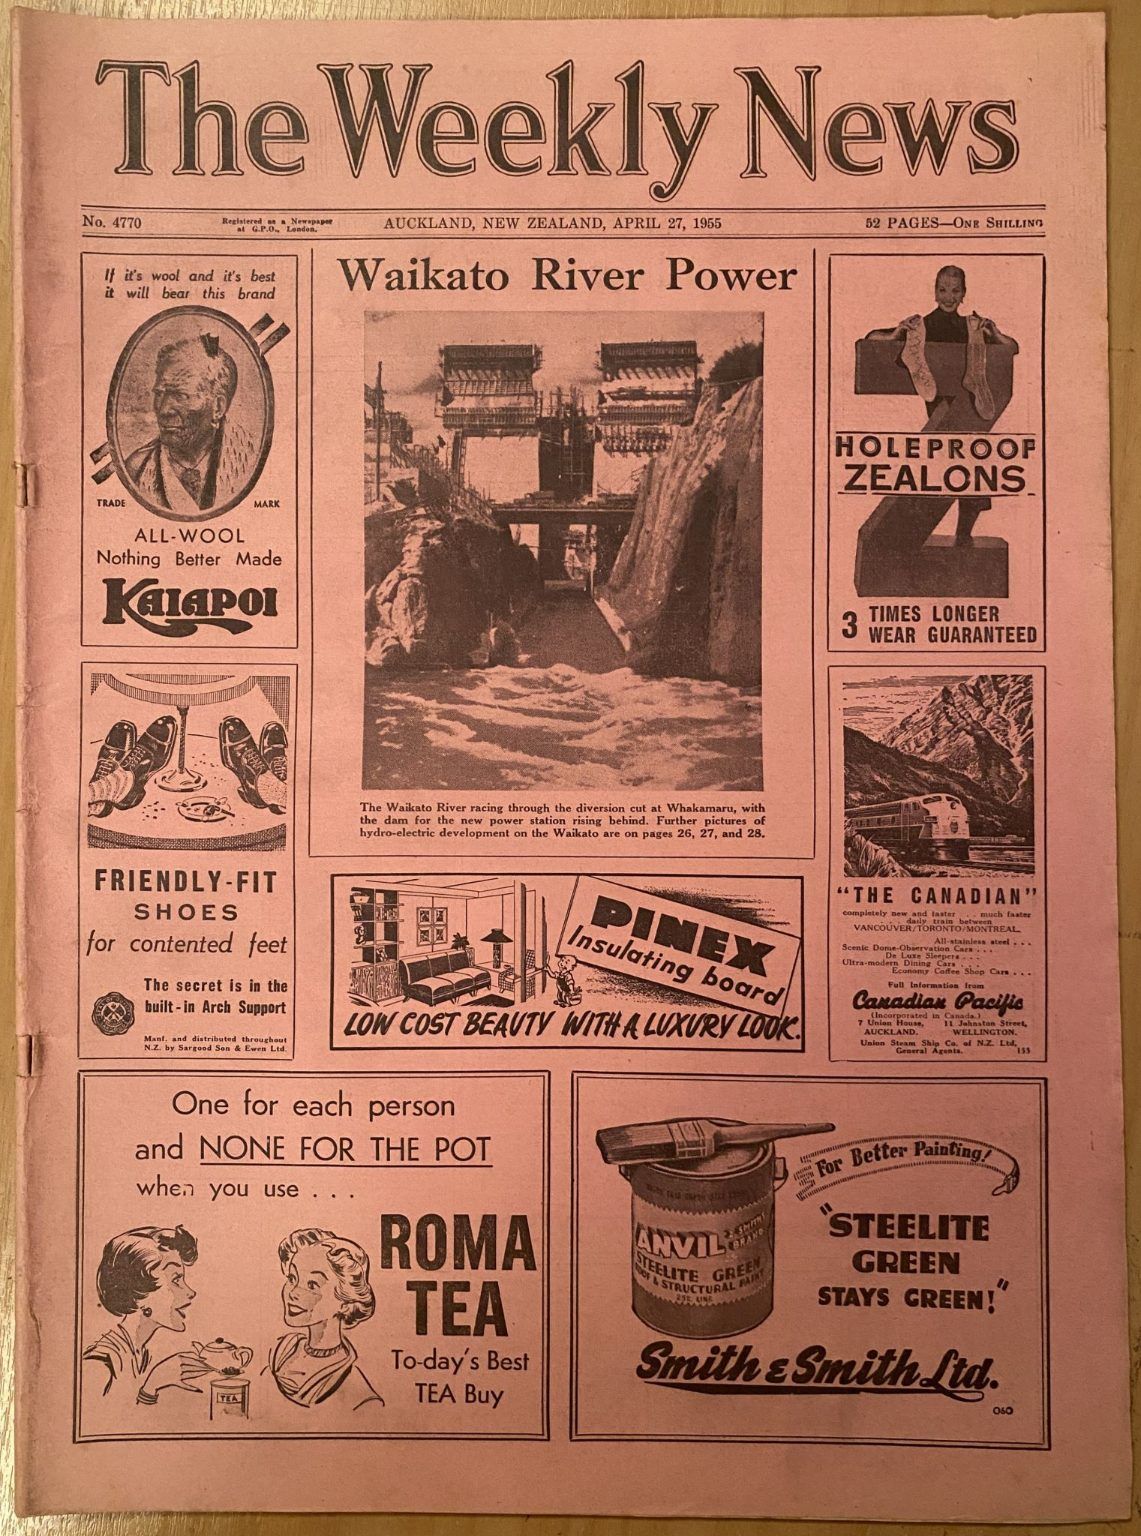 OLD NEWSPAPER: The Weekly News - No. 4770, 27 April 1955